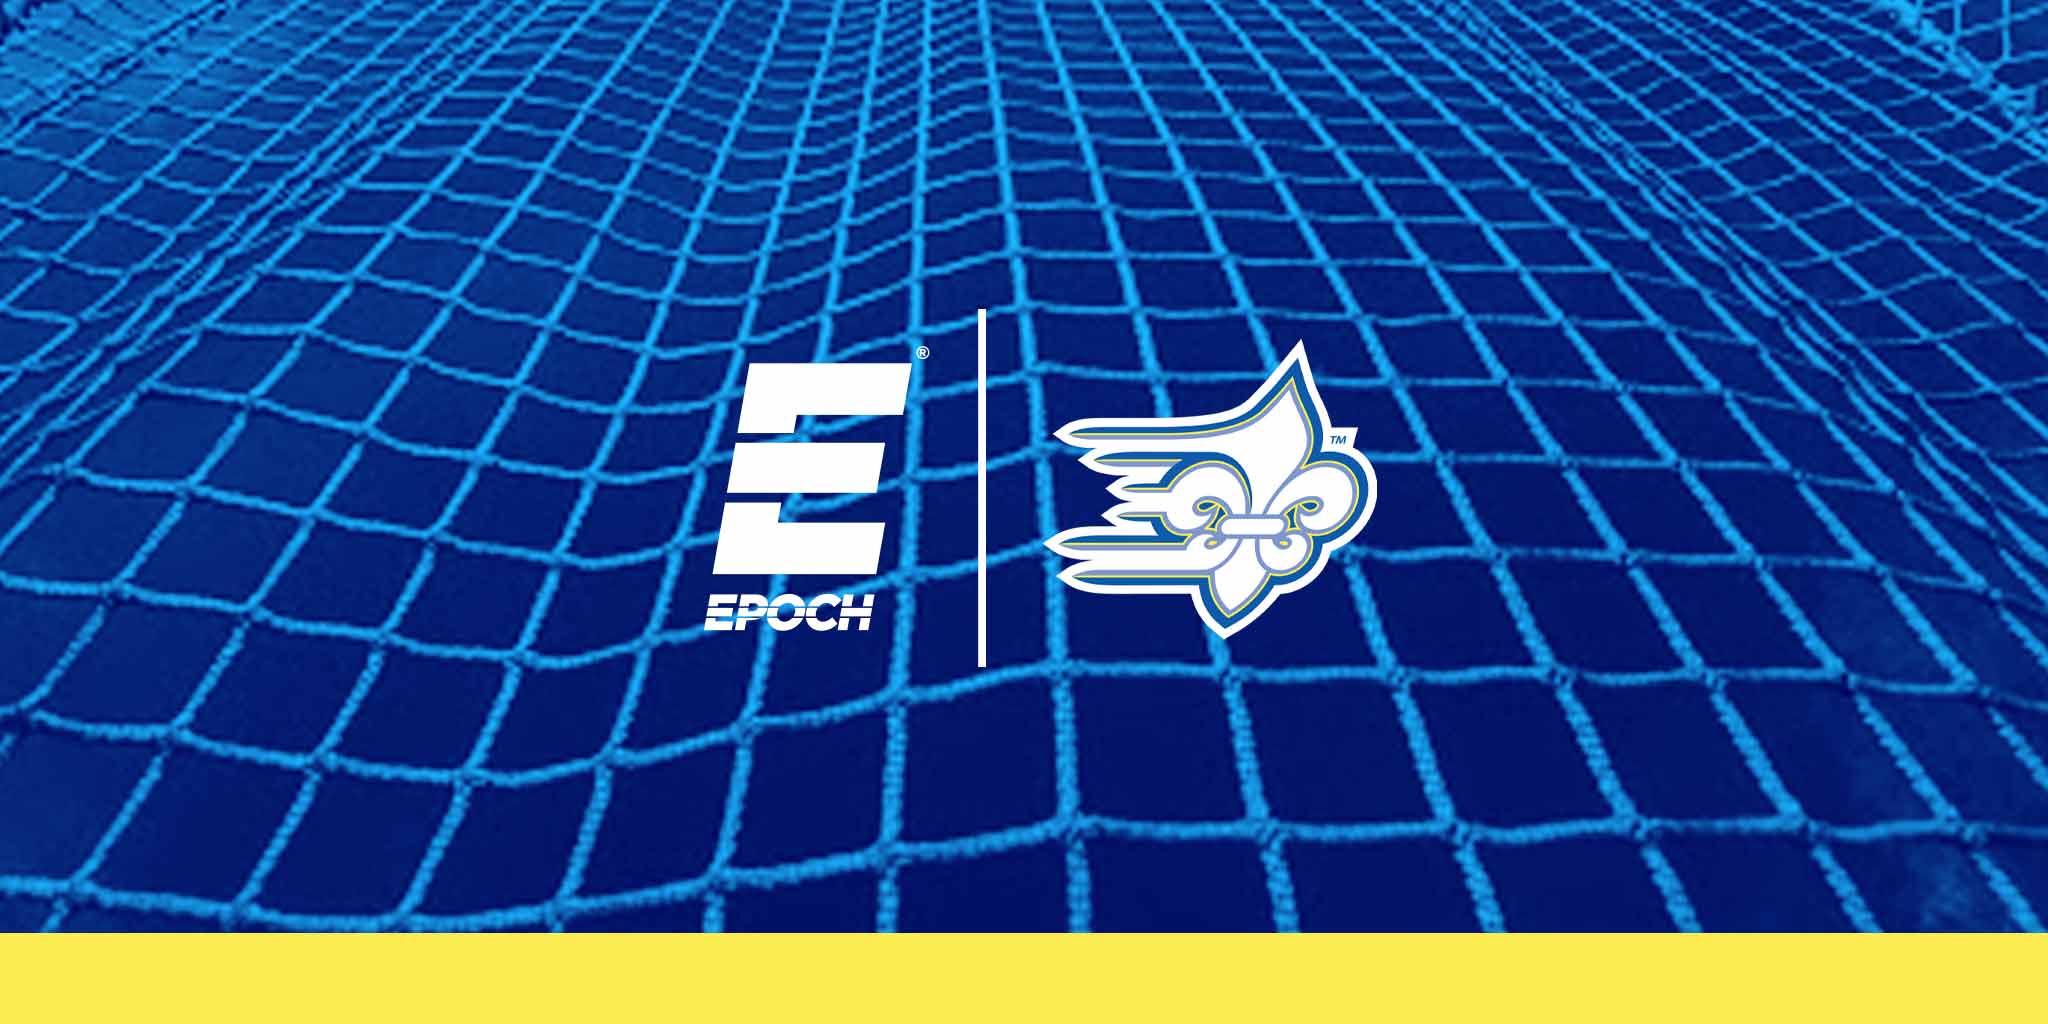 Limestone Signs 3-Year Partnership Agreement with Epoch Lacrosse